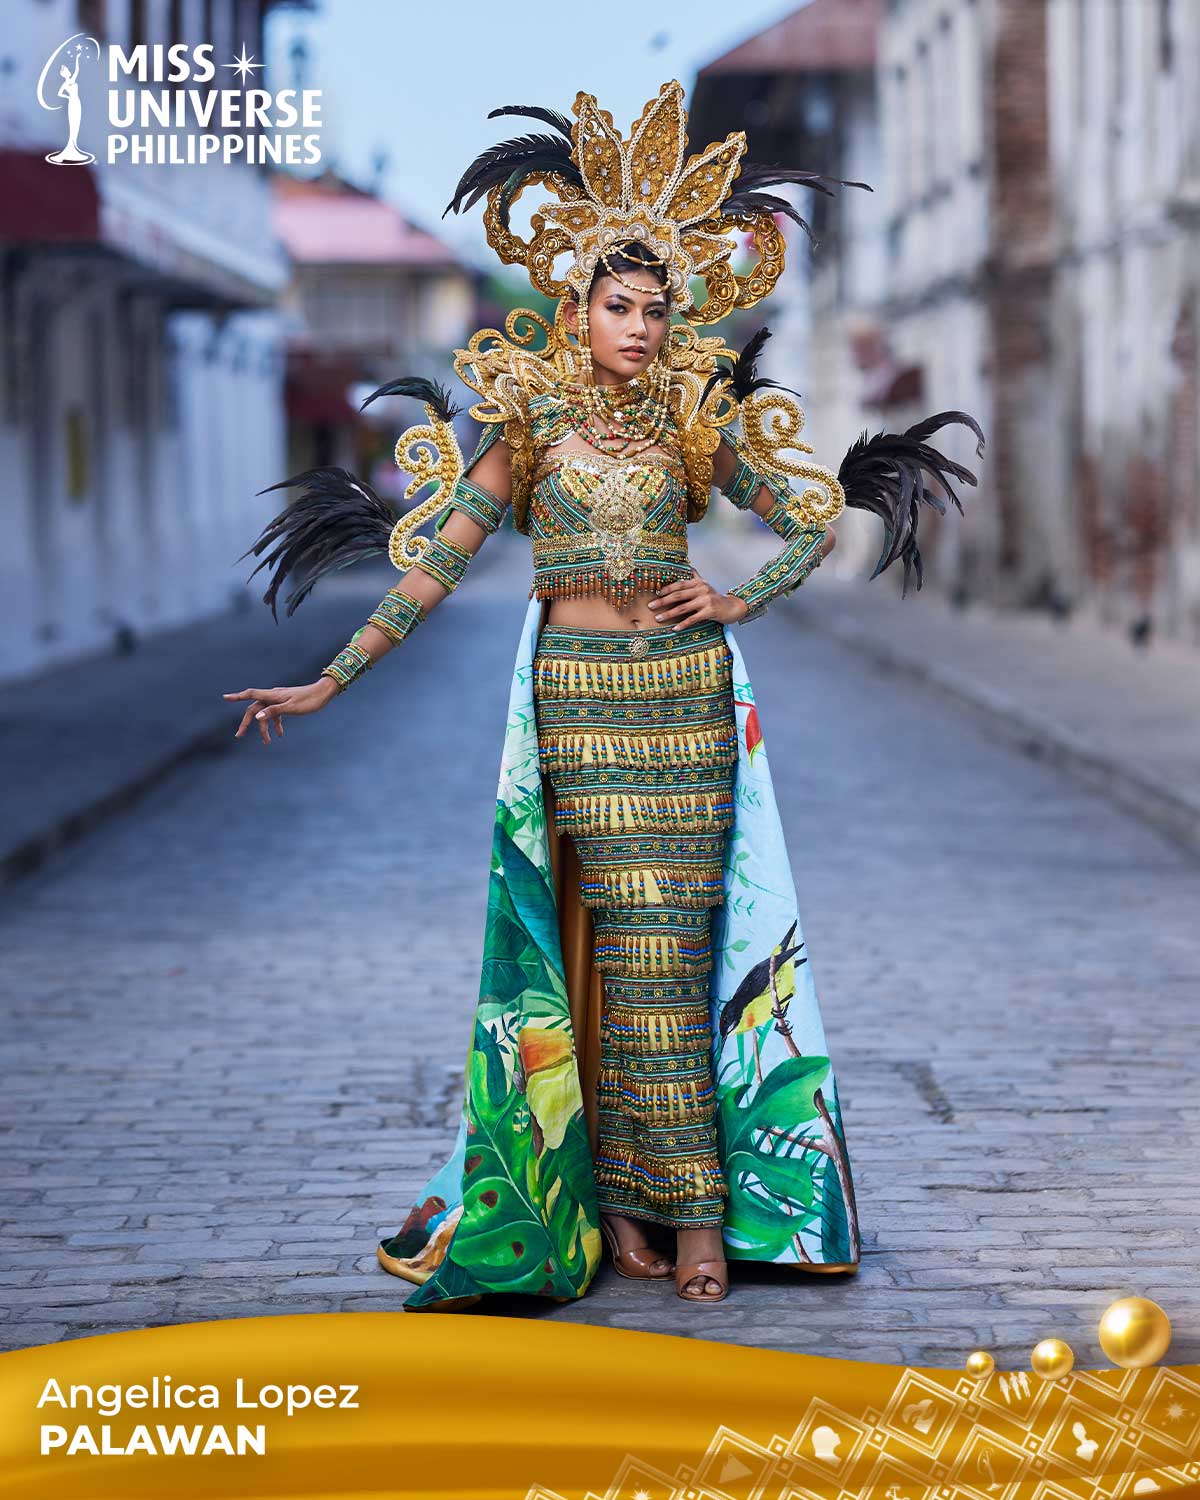 Miss Universe Philippines 2022 national costume